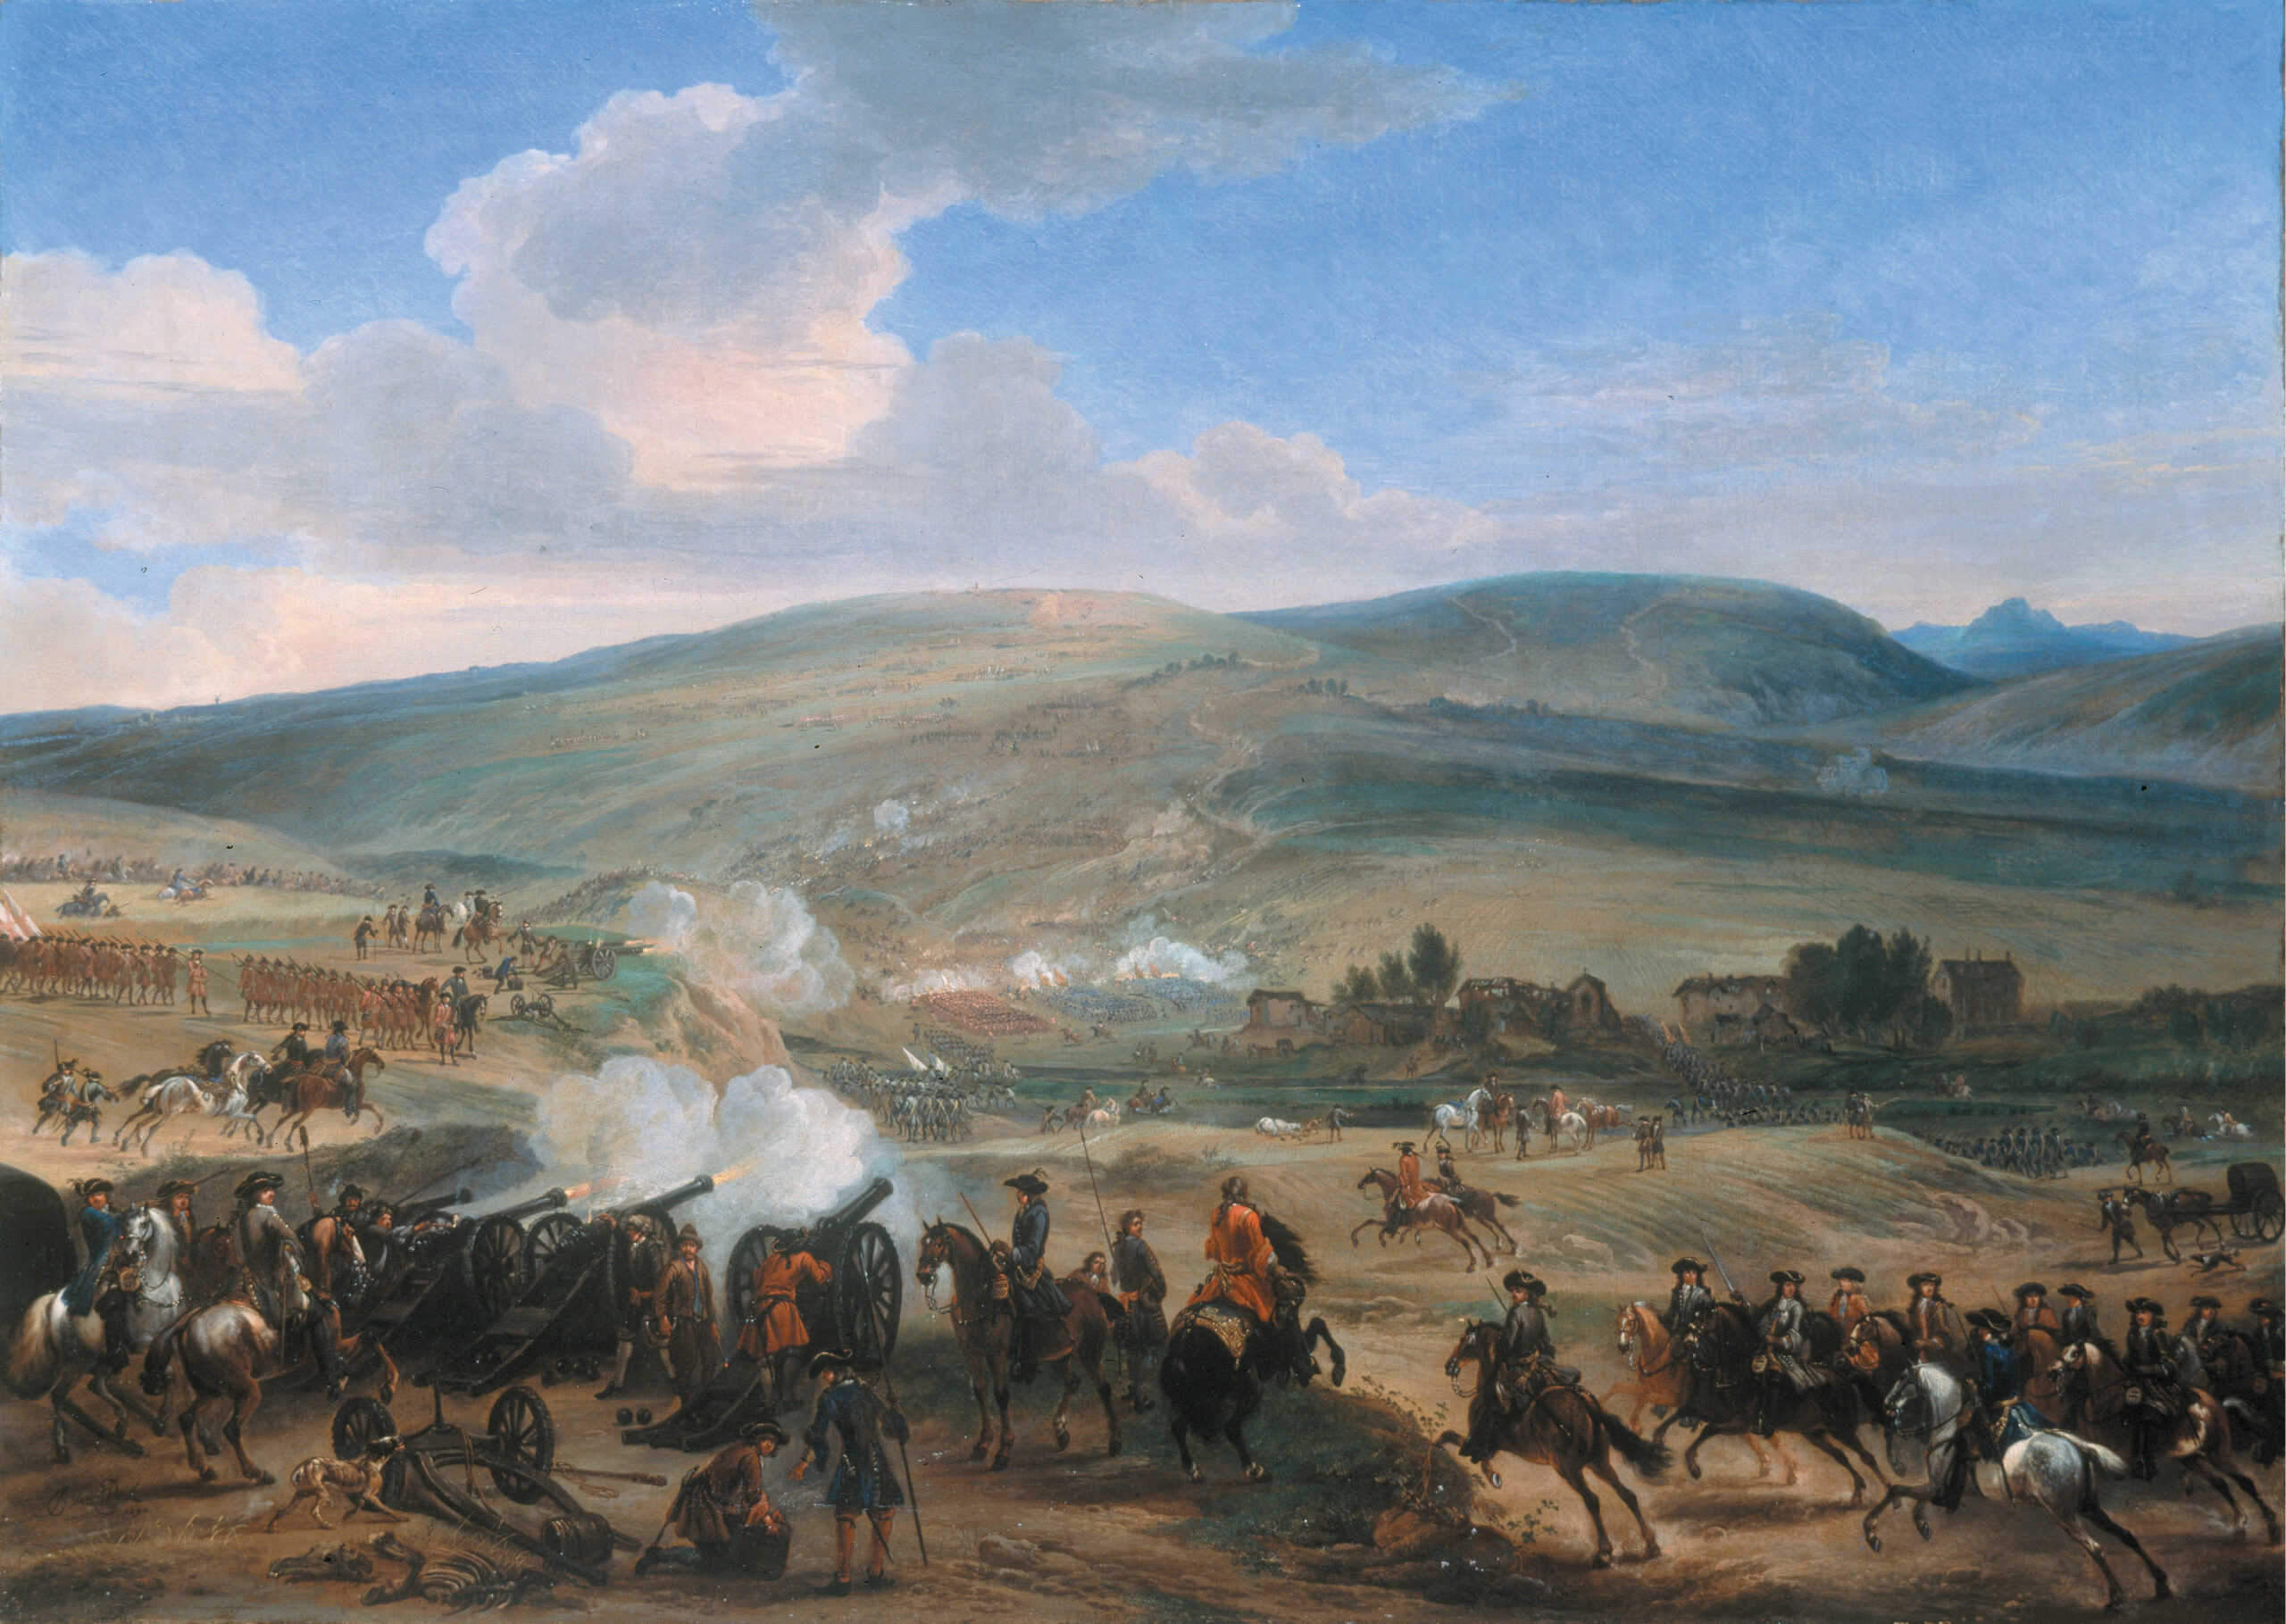 In the battle’s opening sequence, opposing artillery units exchange volleys across the Boyne River valley near the village of Oldbridge.